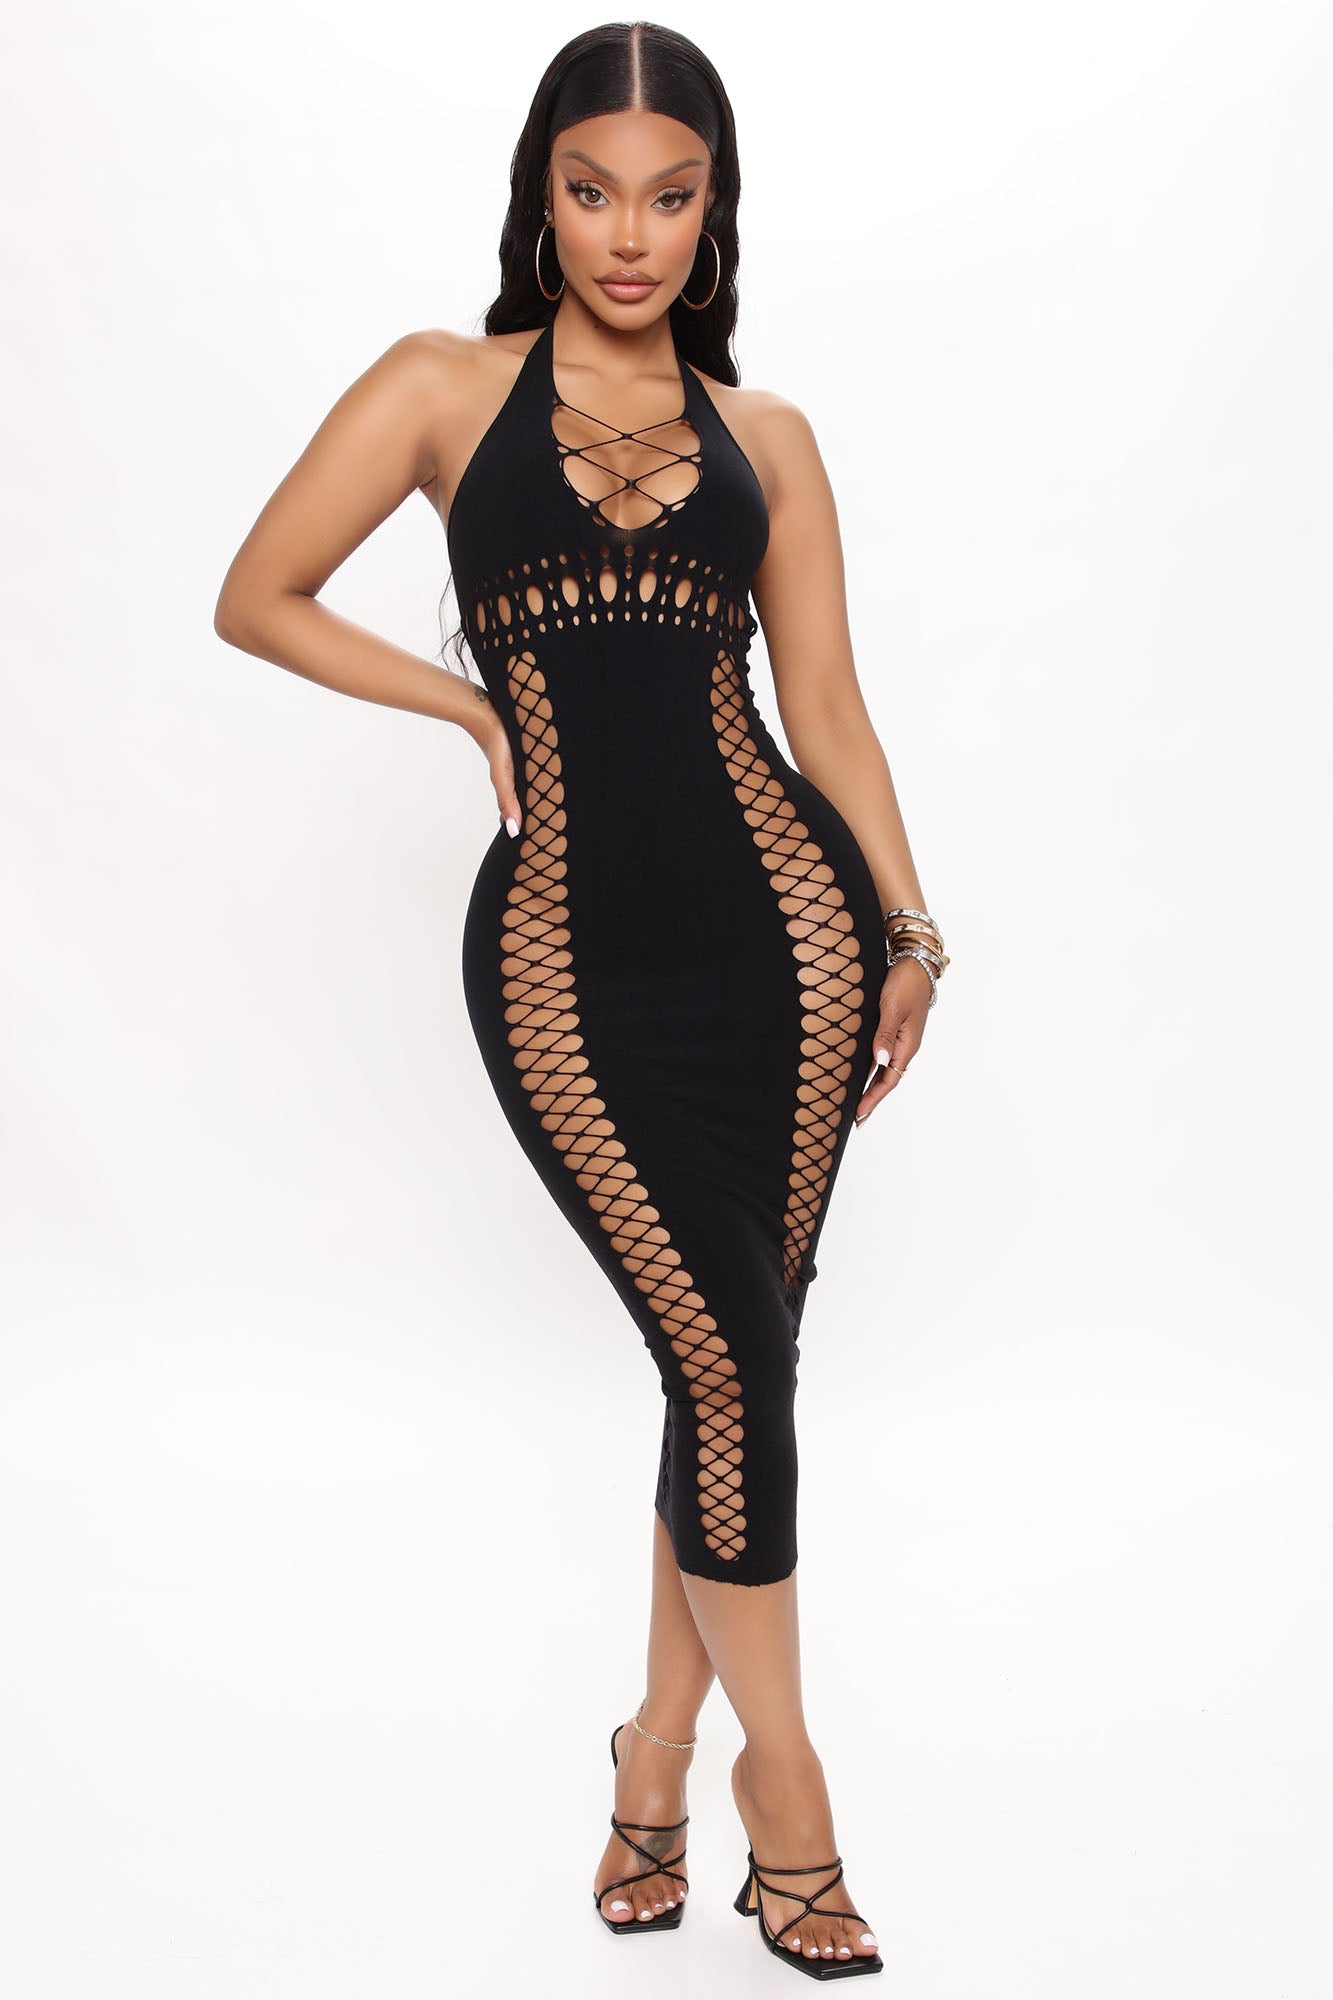 Hottest In The Room Seamless Midi Dress - Black